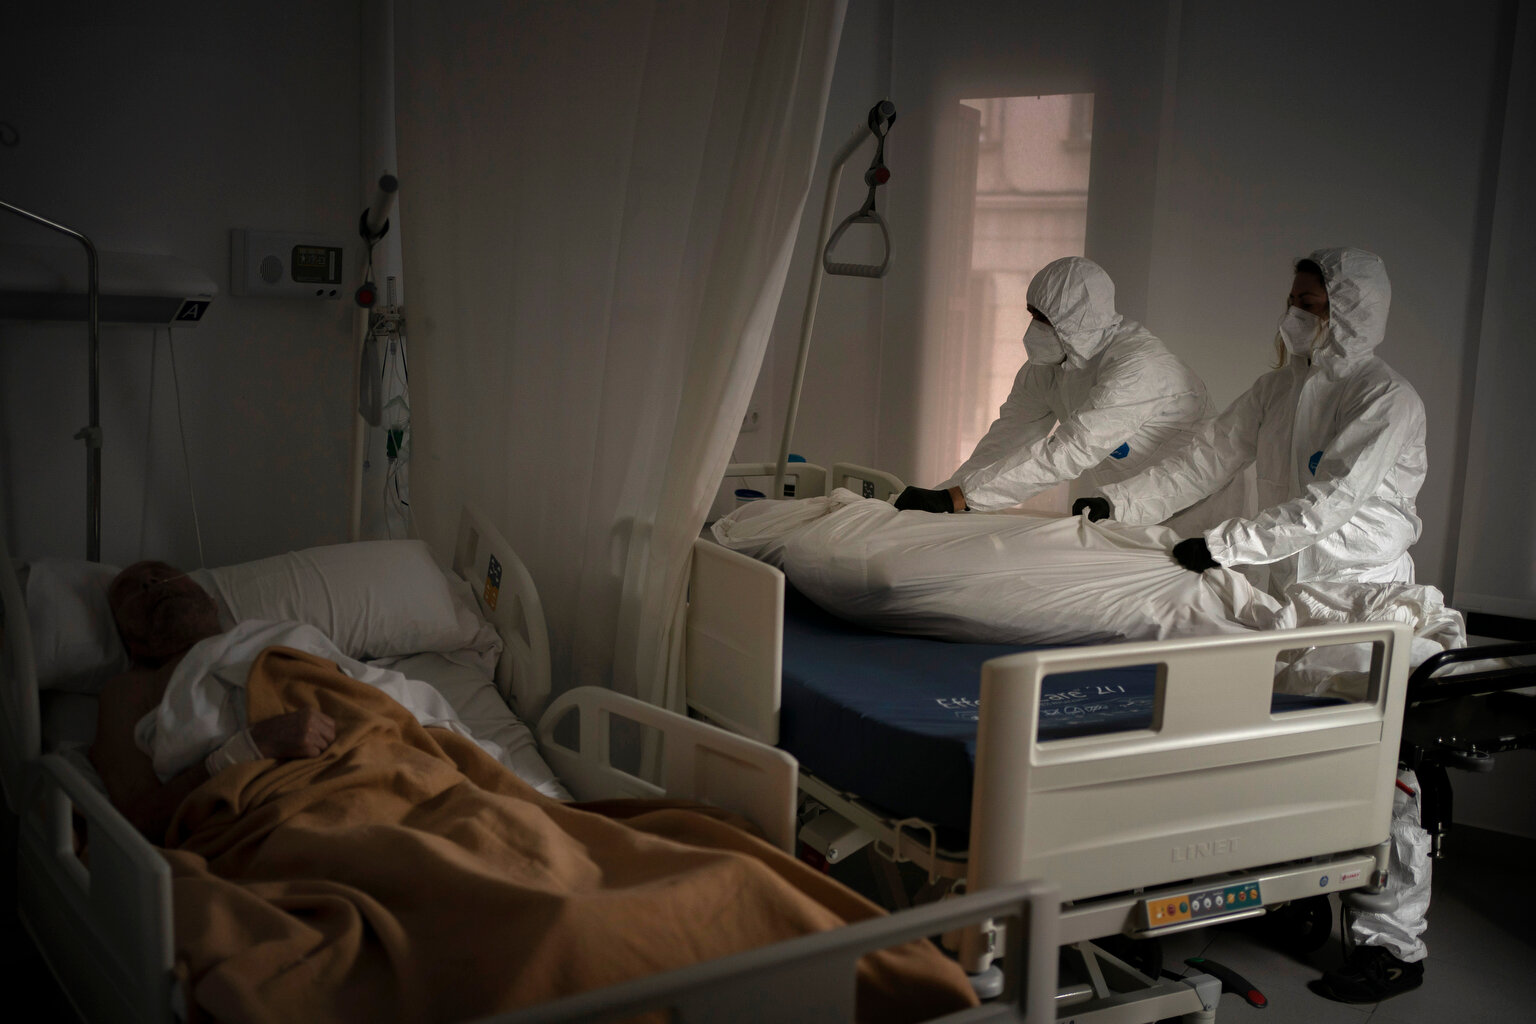  Wearing protective suits against infection, funeral home workers remove the body of an elderly person who died of COVID-19 at a nursing home while another resident sleeps in his bed in Barcelona, Spain Thursday Nov. 5, 2020. (AP Photo/Emilio Morenat